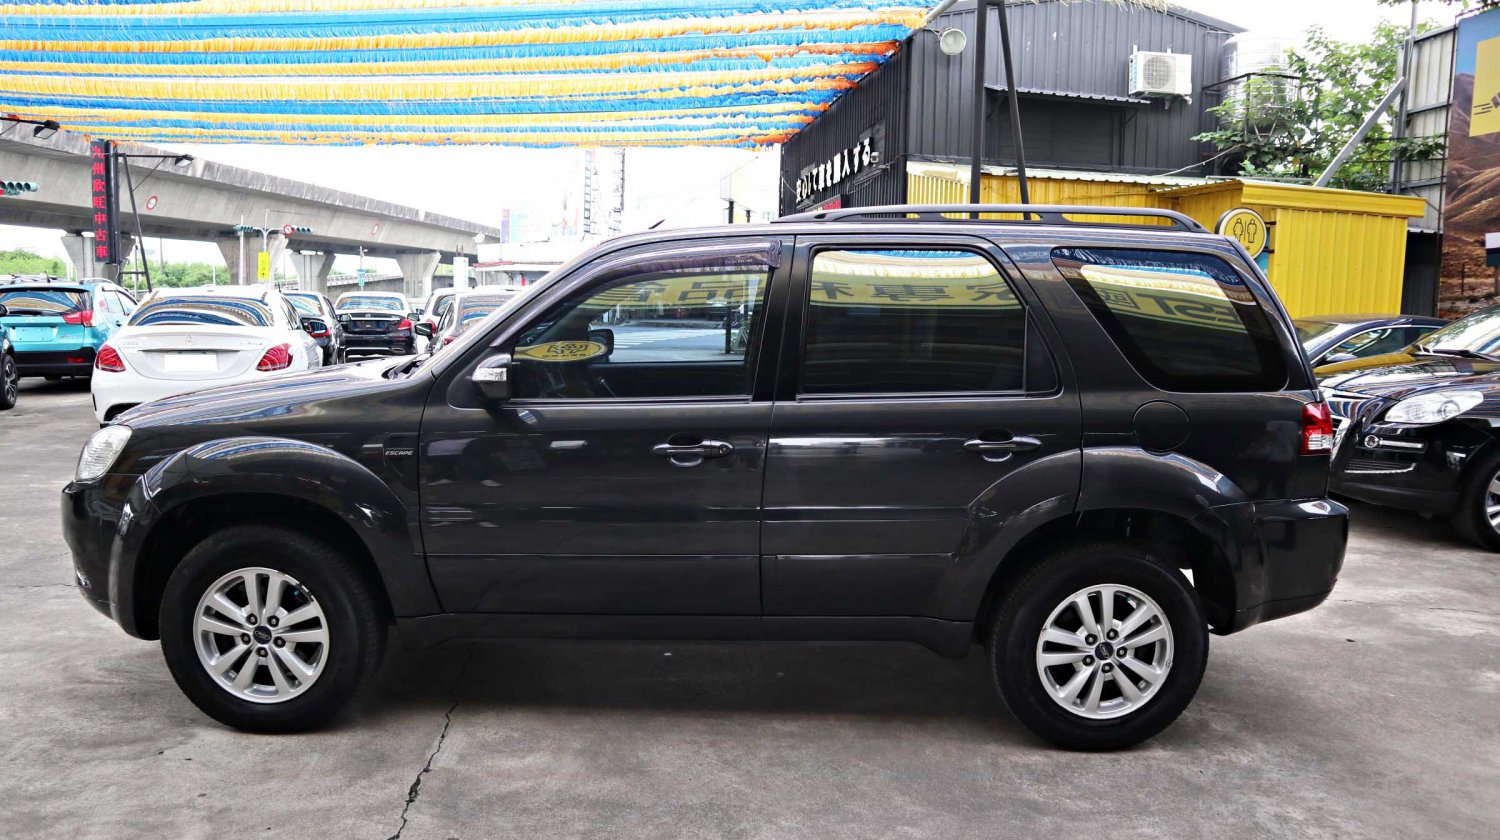 Ford 福特 ／ Escape ／ 2010年 ／ 2010年 Ford Escape 灰色 福特中古休旅車 ／ 成交區